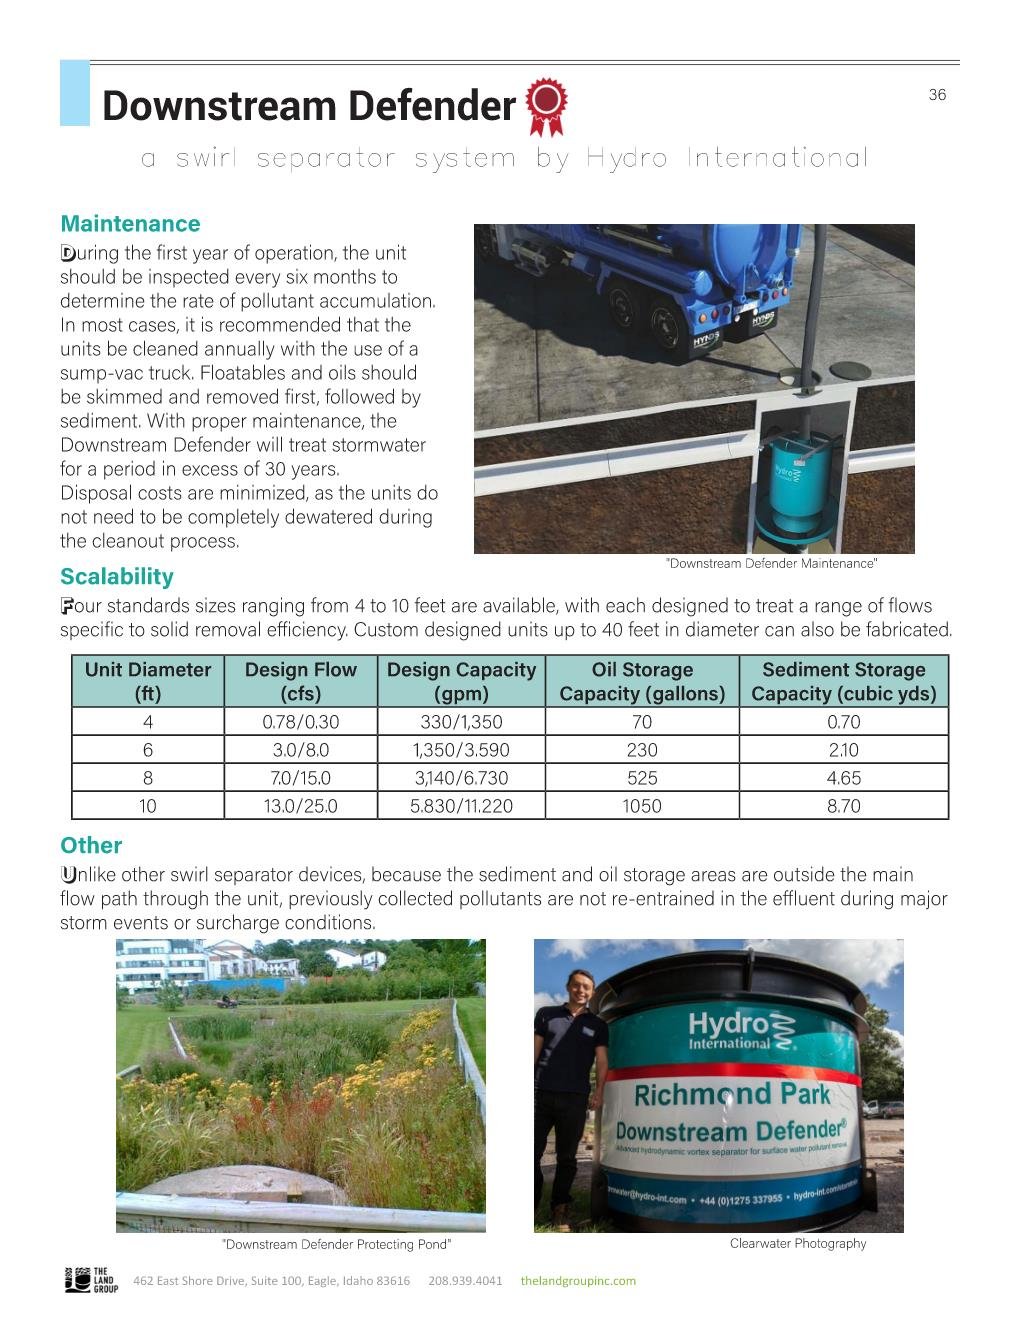 Stormwater Management Technology Comparison Toolkit Page 036.jpg